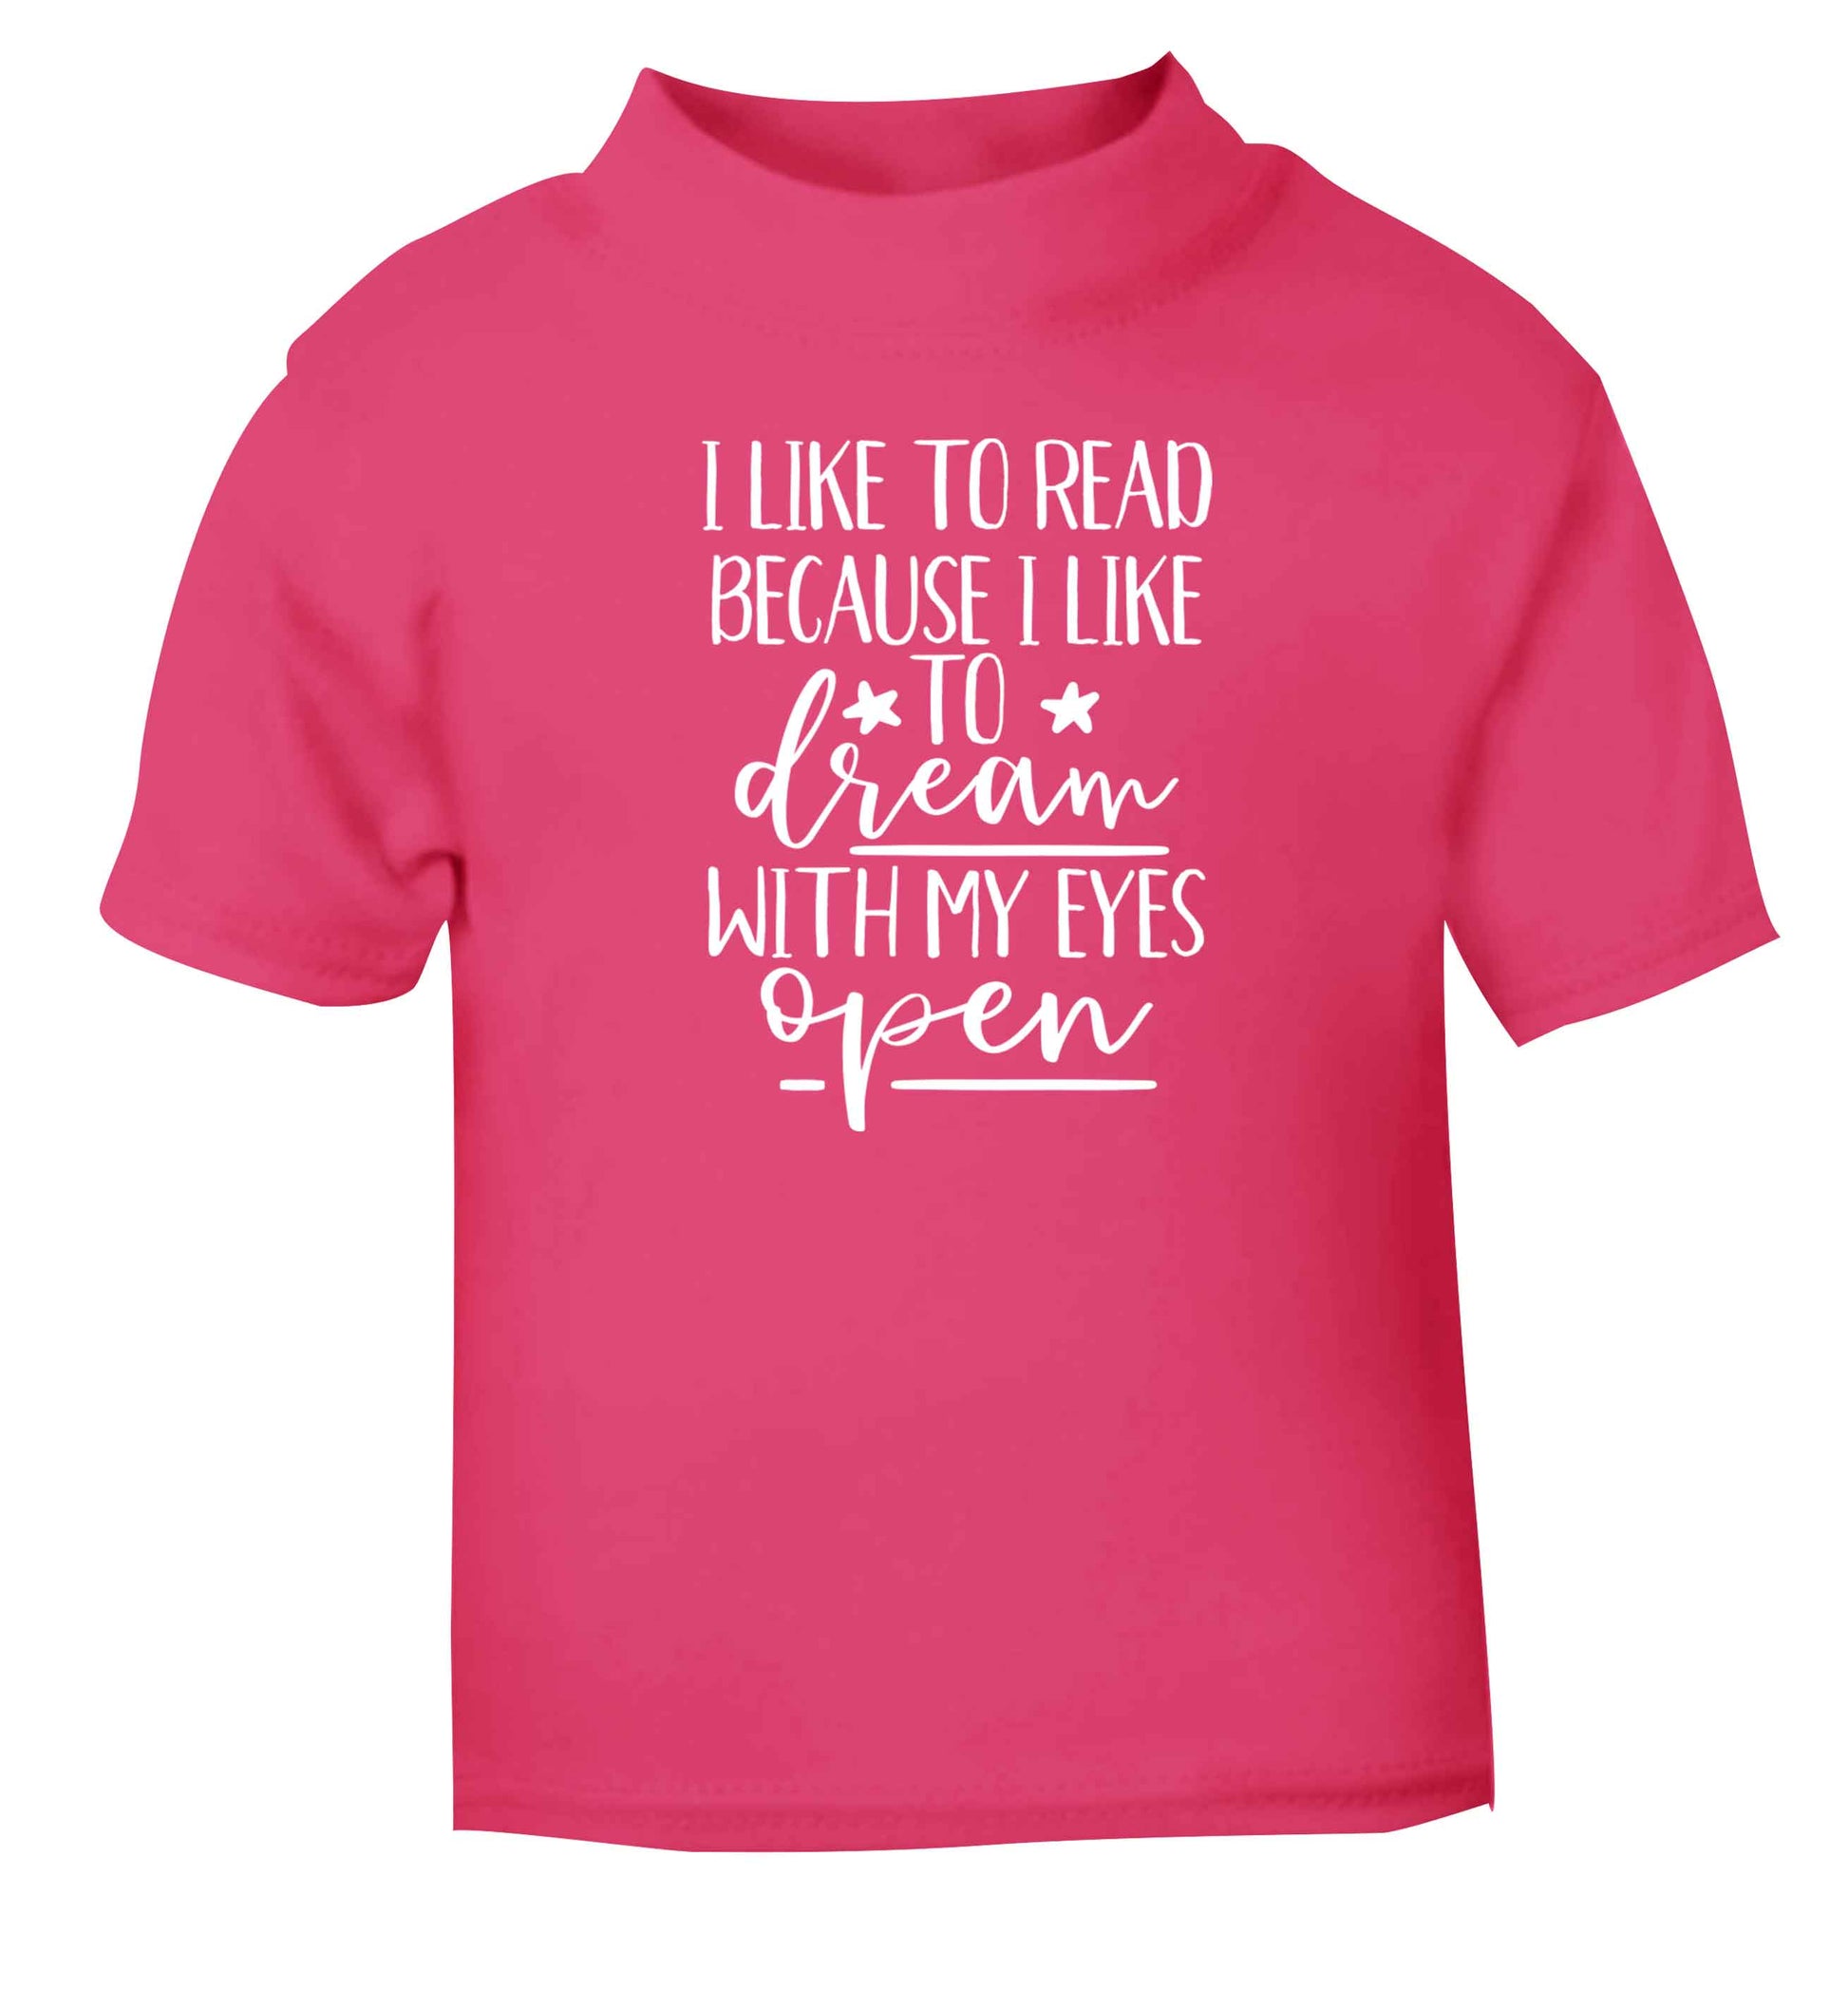 I like to read because I like to dream with my eyes open pink Baby Toddler Tshirt 2 Years